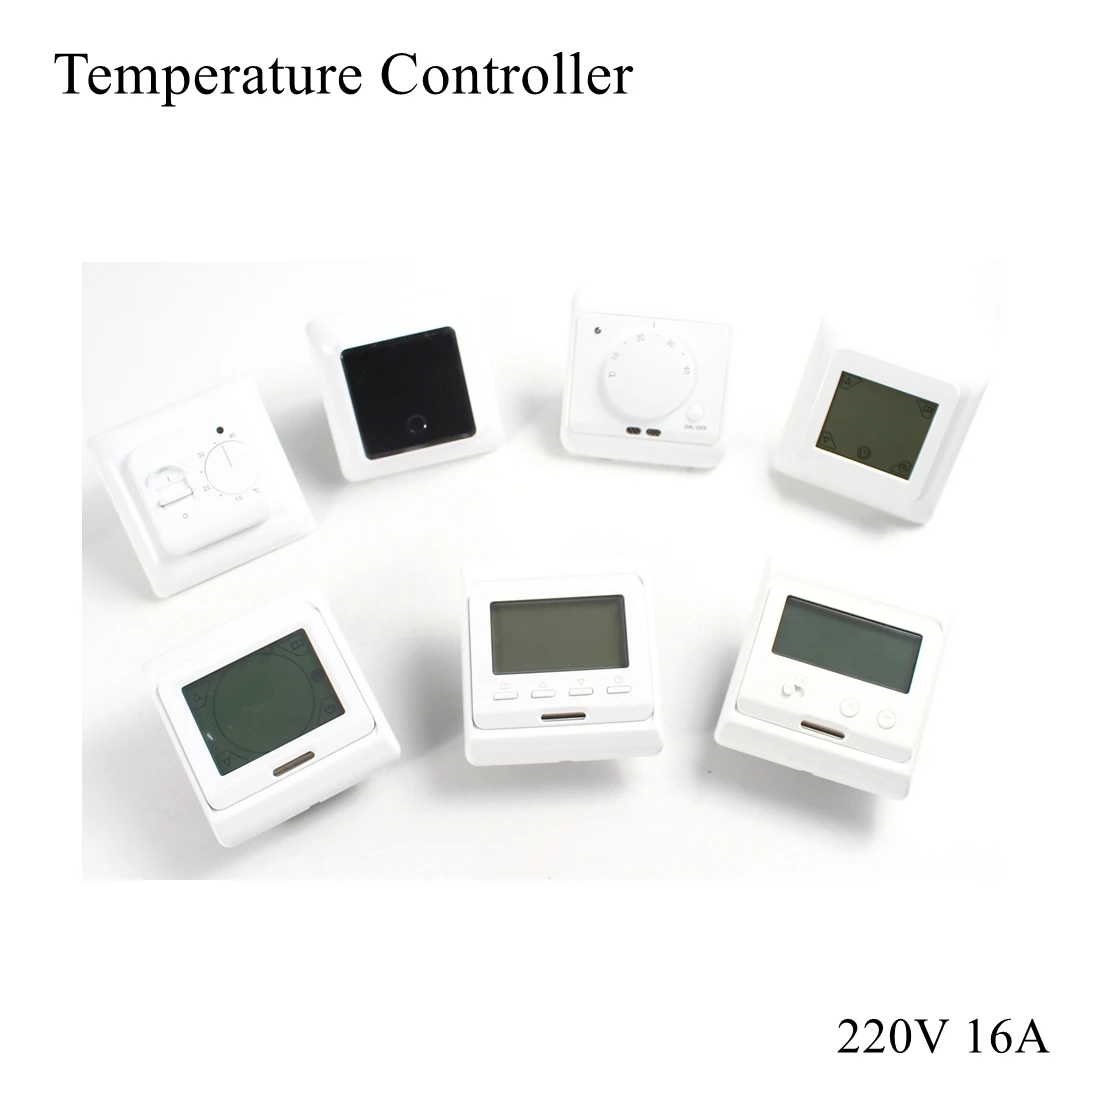 

220V 16A Temperature Controller Digital Thermostat Wifi Remote Control Programing Weekly Intelligent LCD Backlight Instrument